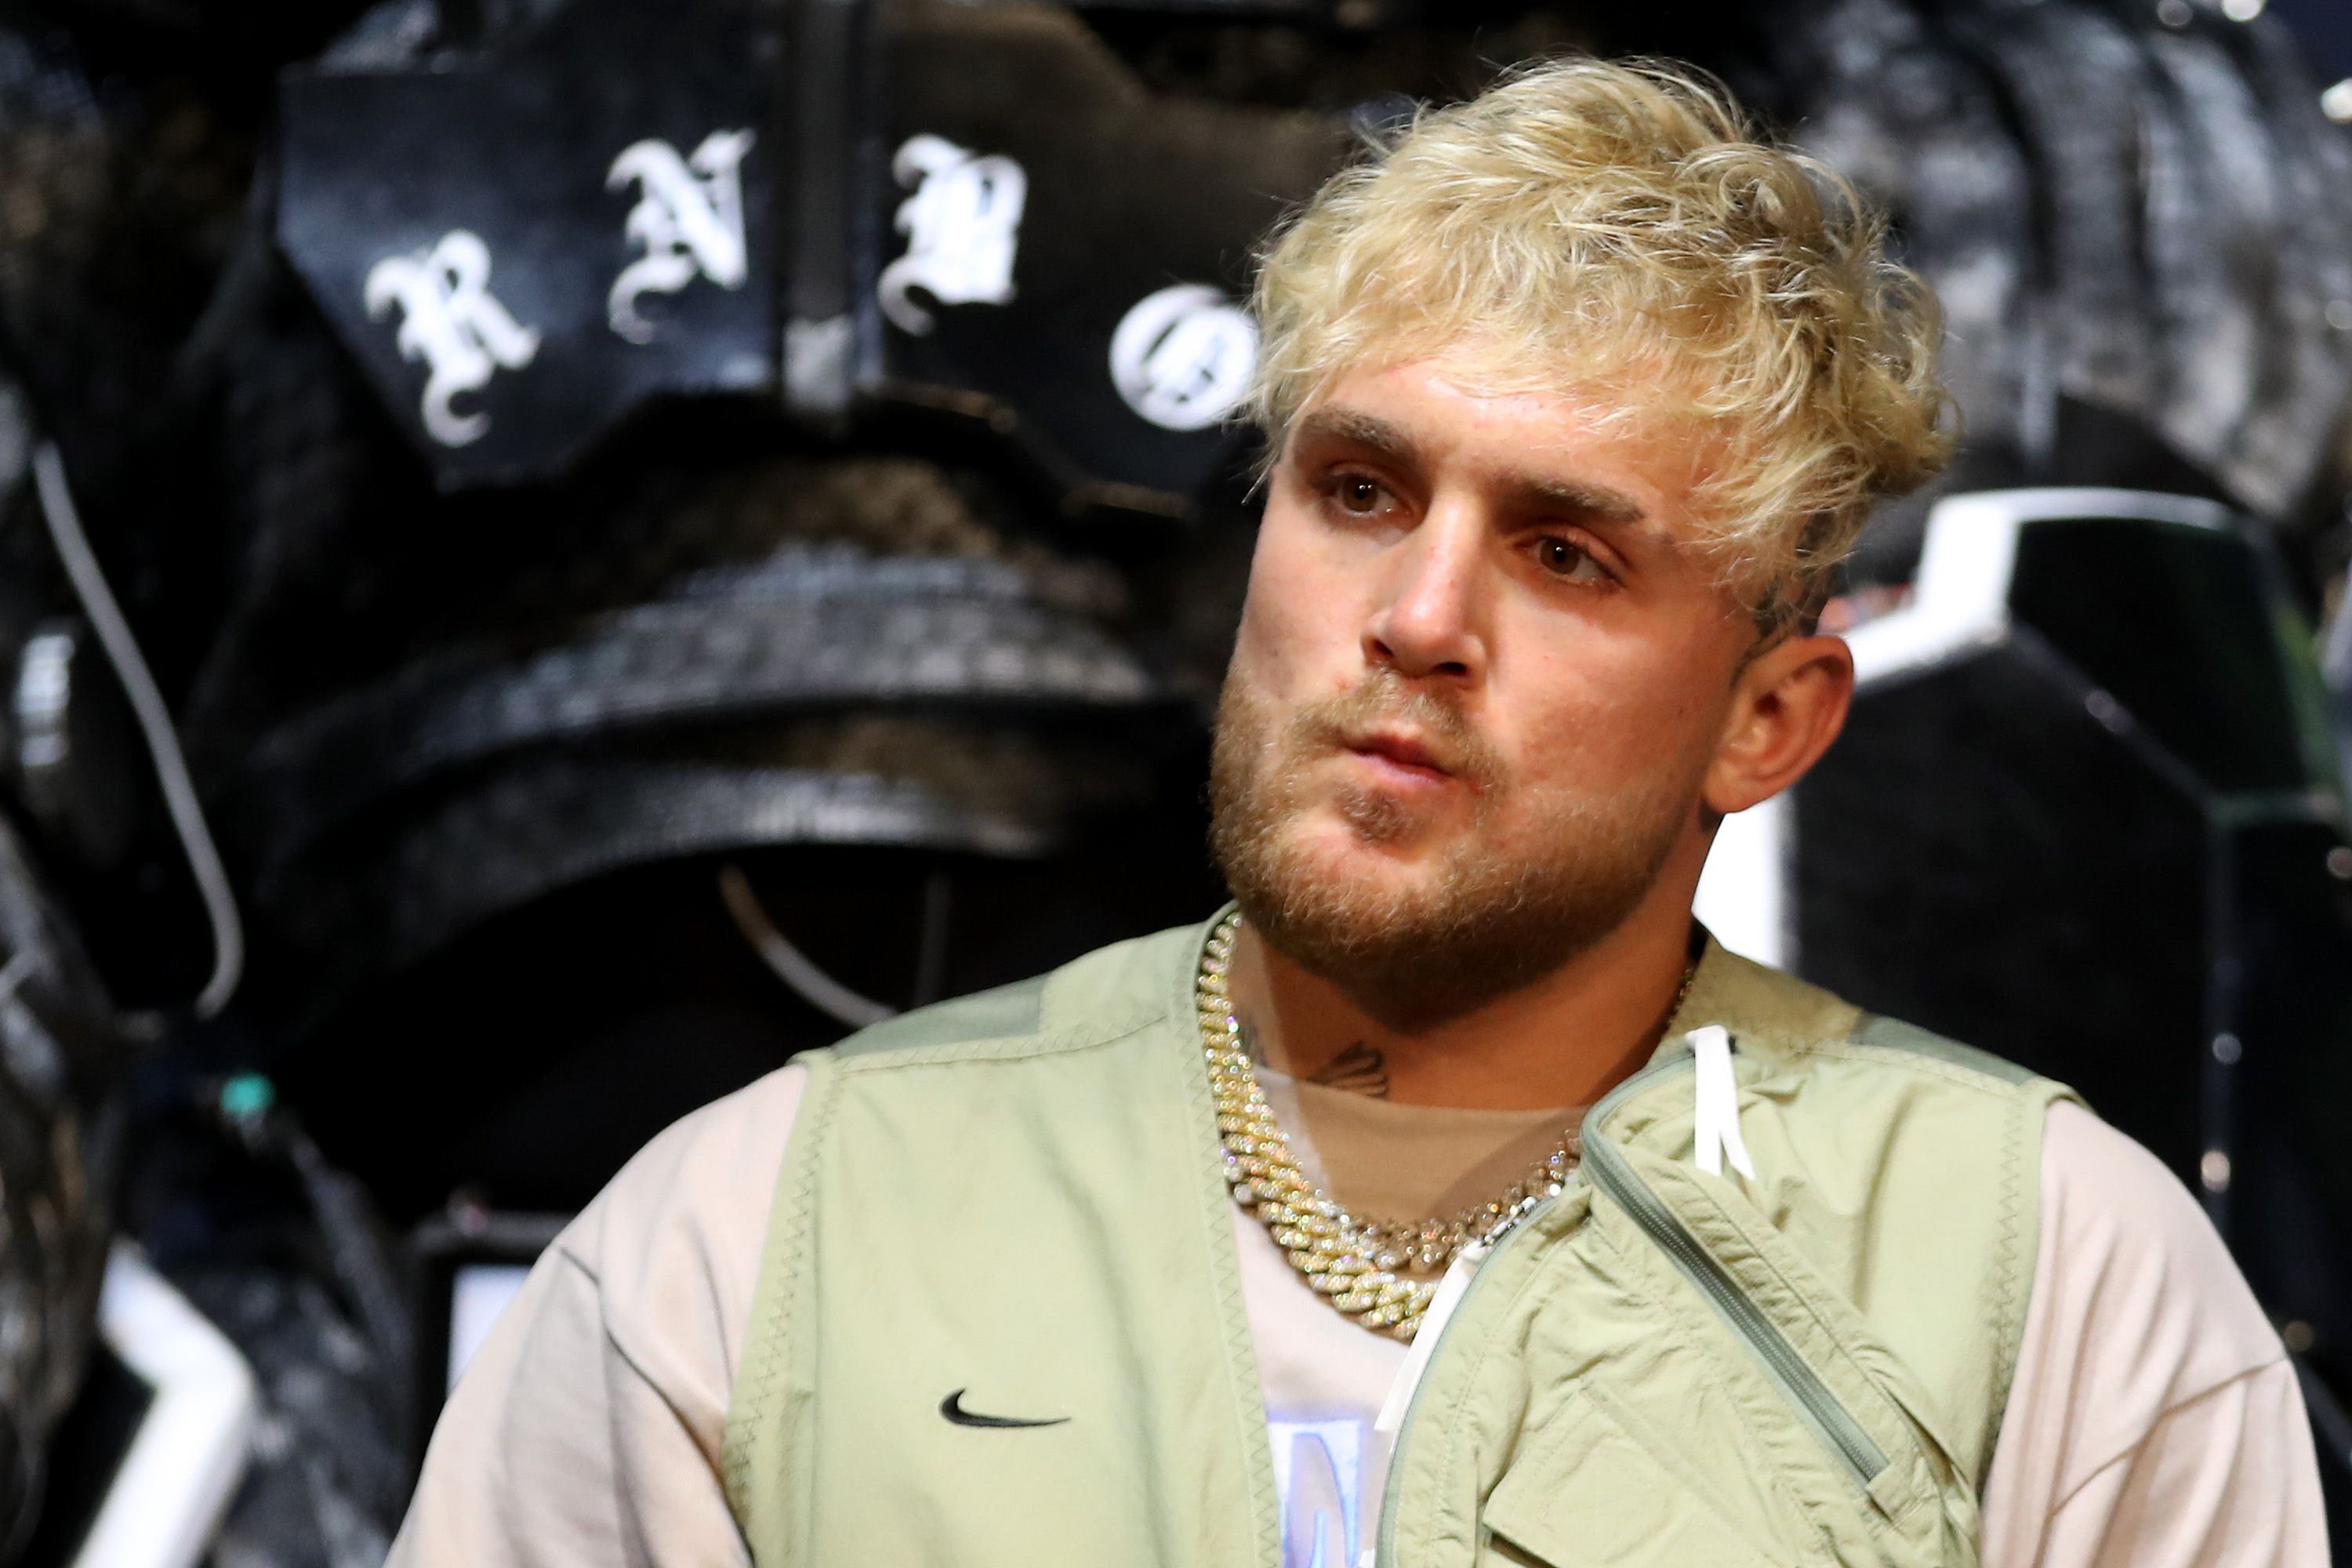 Jake Paul during a press conference before his cruiserweight fight against Tyron Woodley at The Novo by Microsoft at L.A. Live in Los Angeles, California | Photo: Katelyn Mulcahy/Getty Images